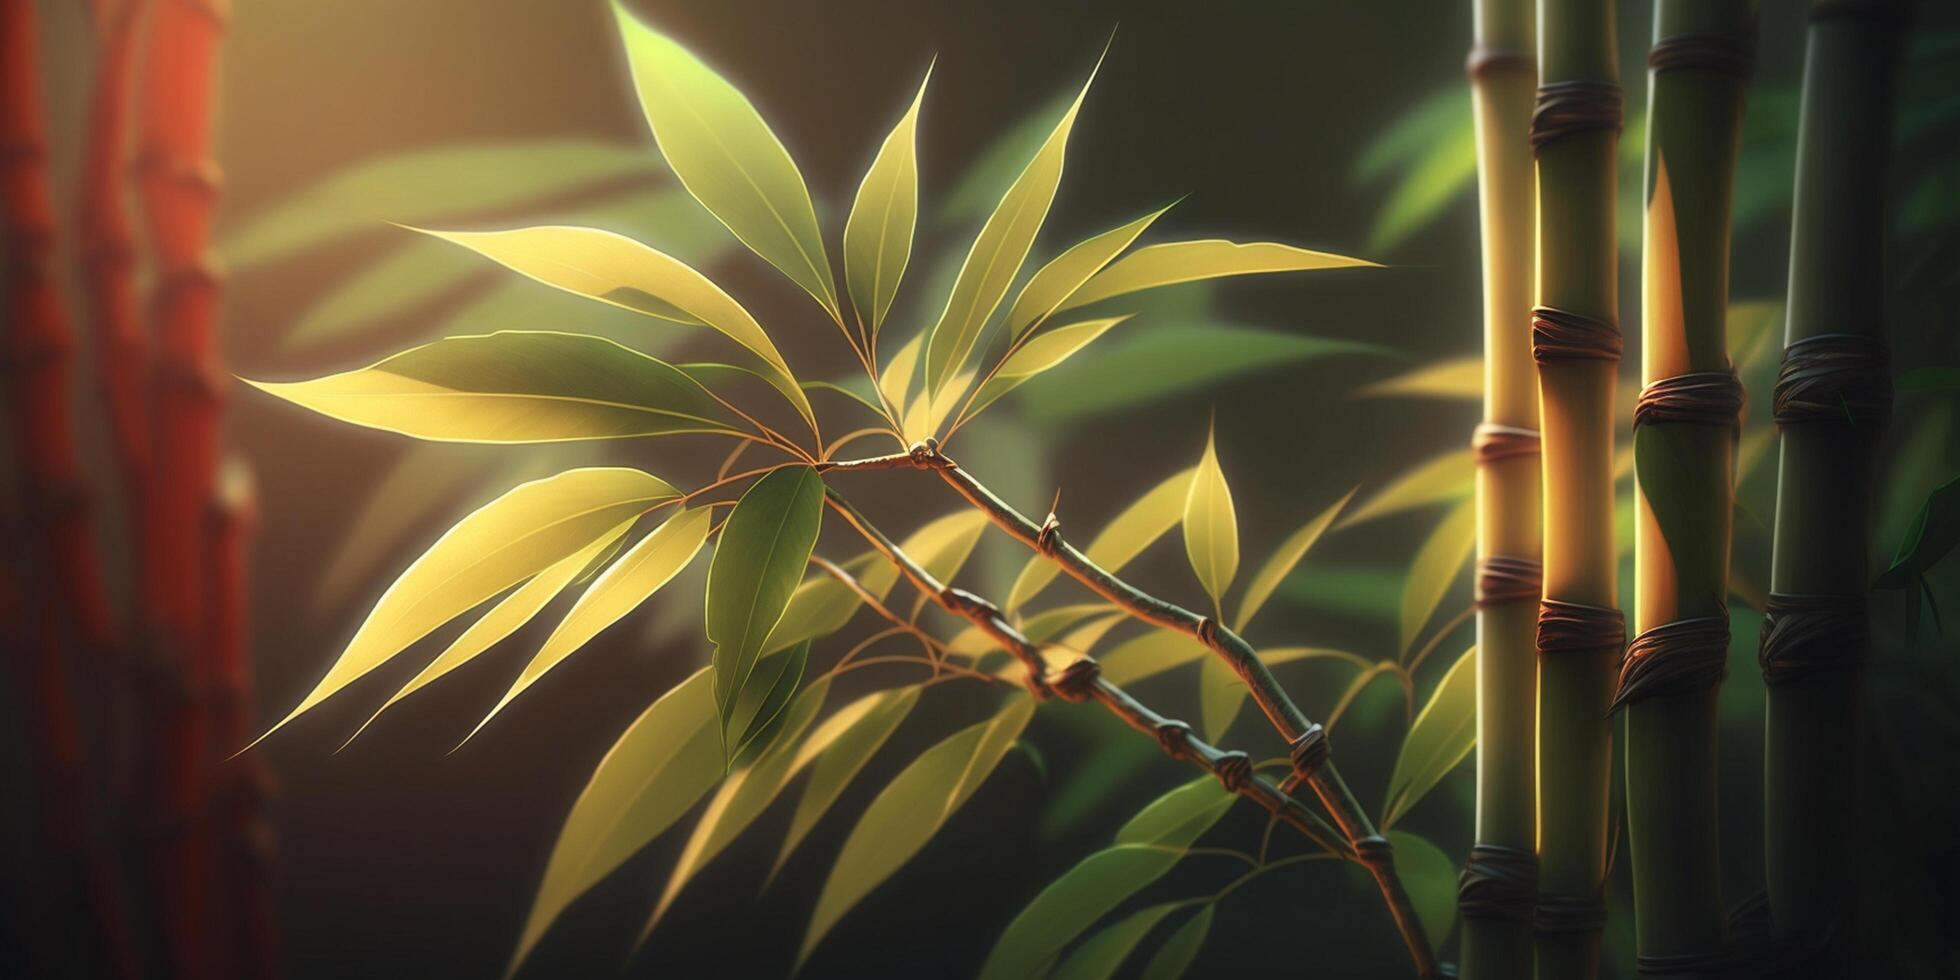 Illustration of Bamboo in Sunlight Spa Relax content photo